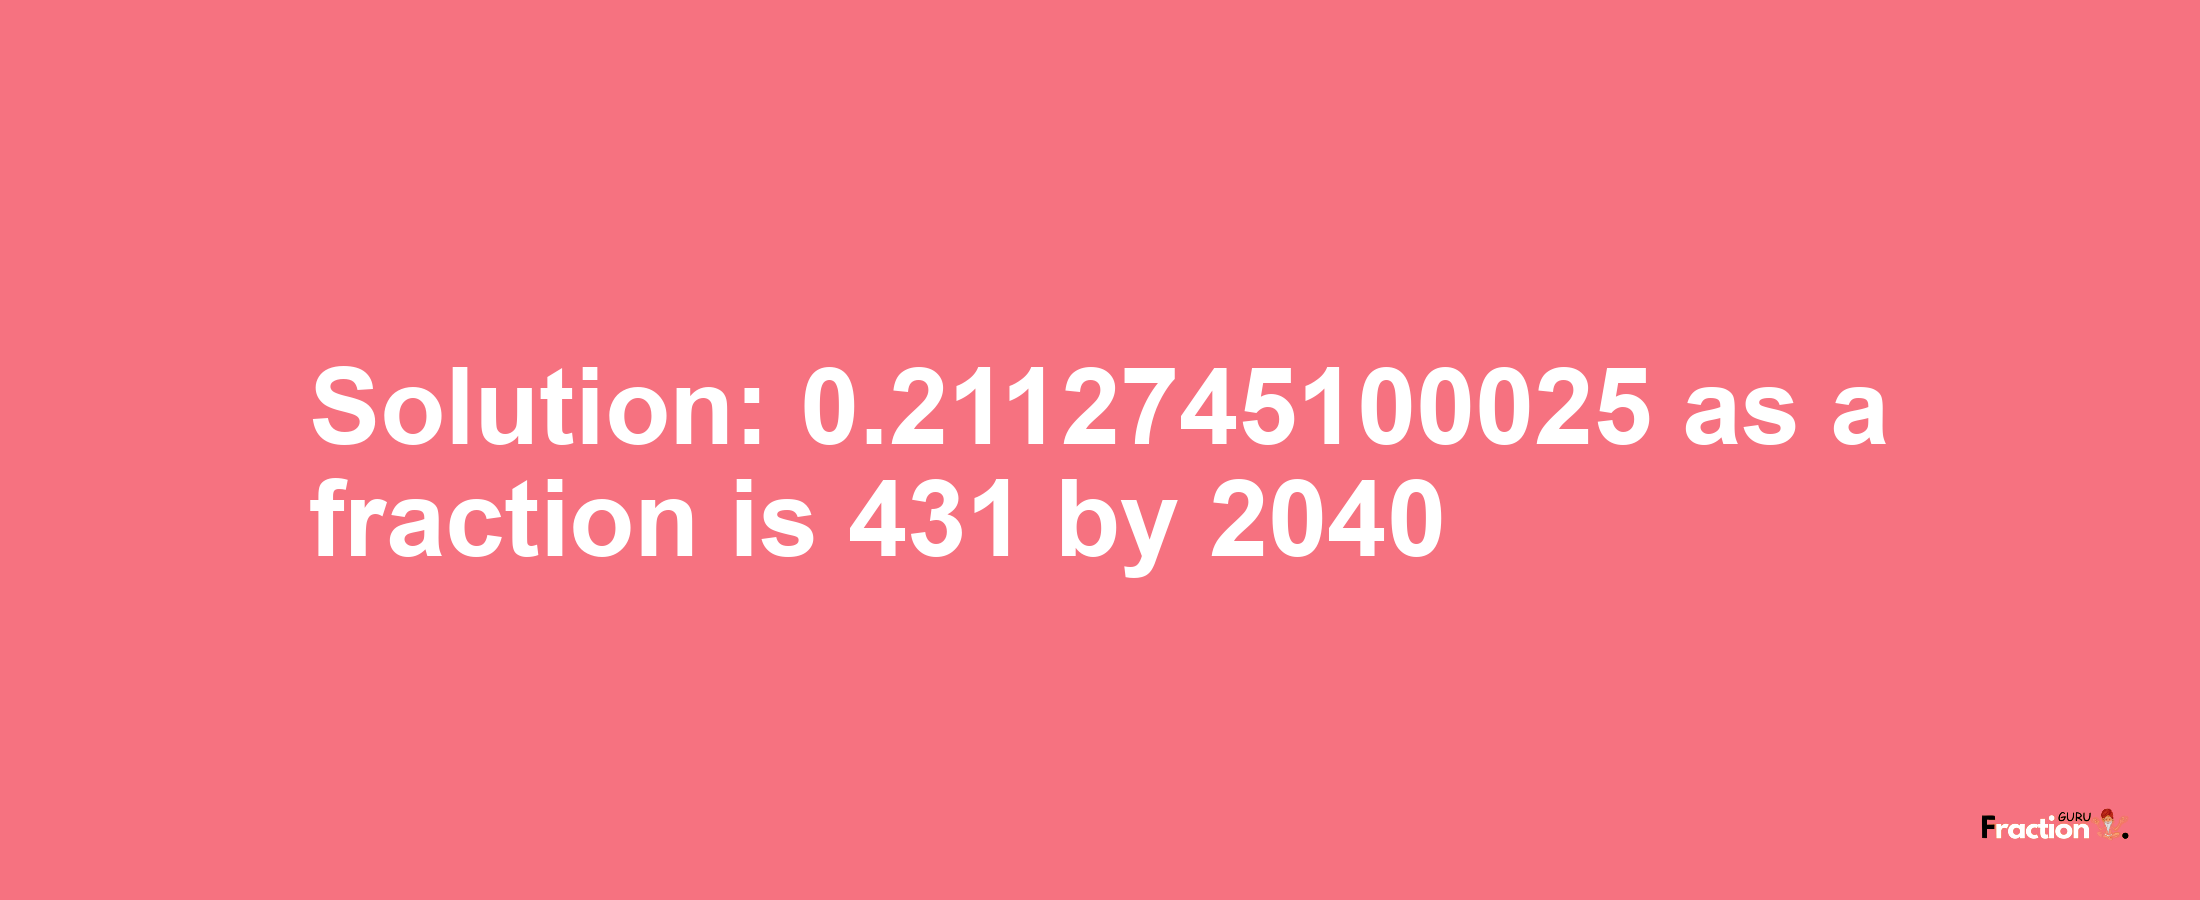 Solution:0.2112745100025 as a fraction is 431/2040